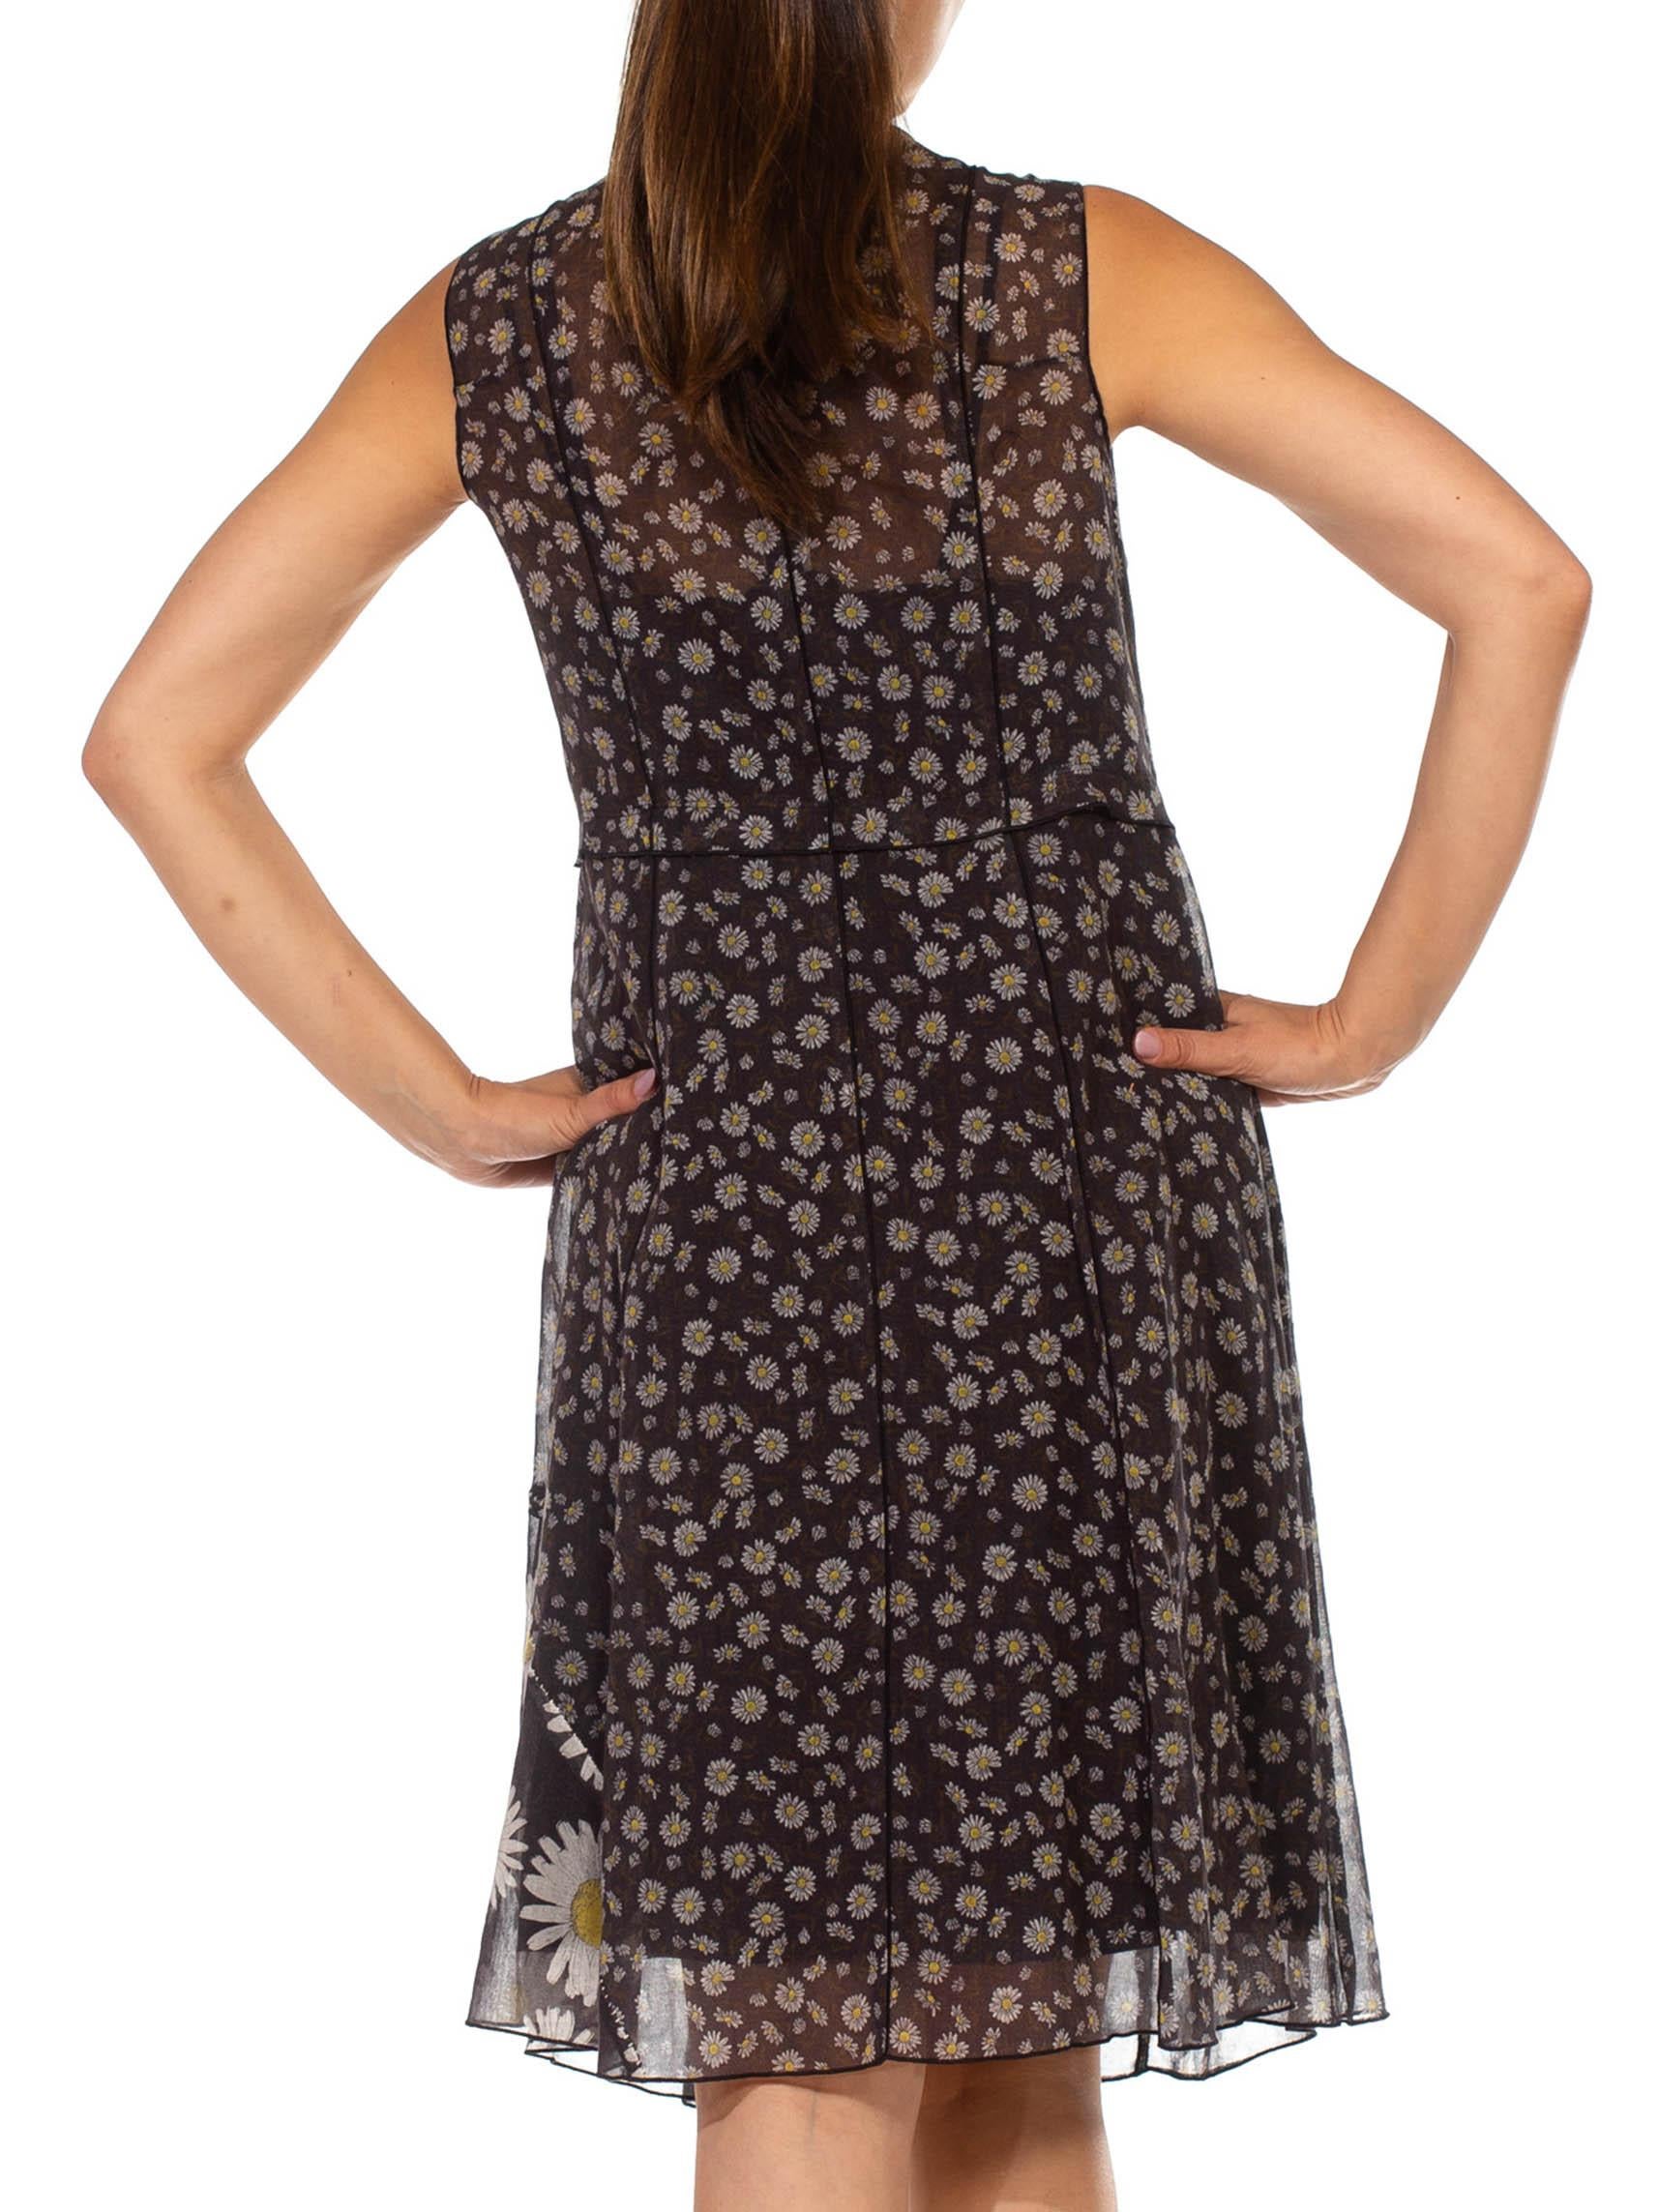 1990S MARC JACOBS Black Daisy Print Cotton Dress With Patchwork And Ruffle Deta For Sale 3